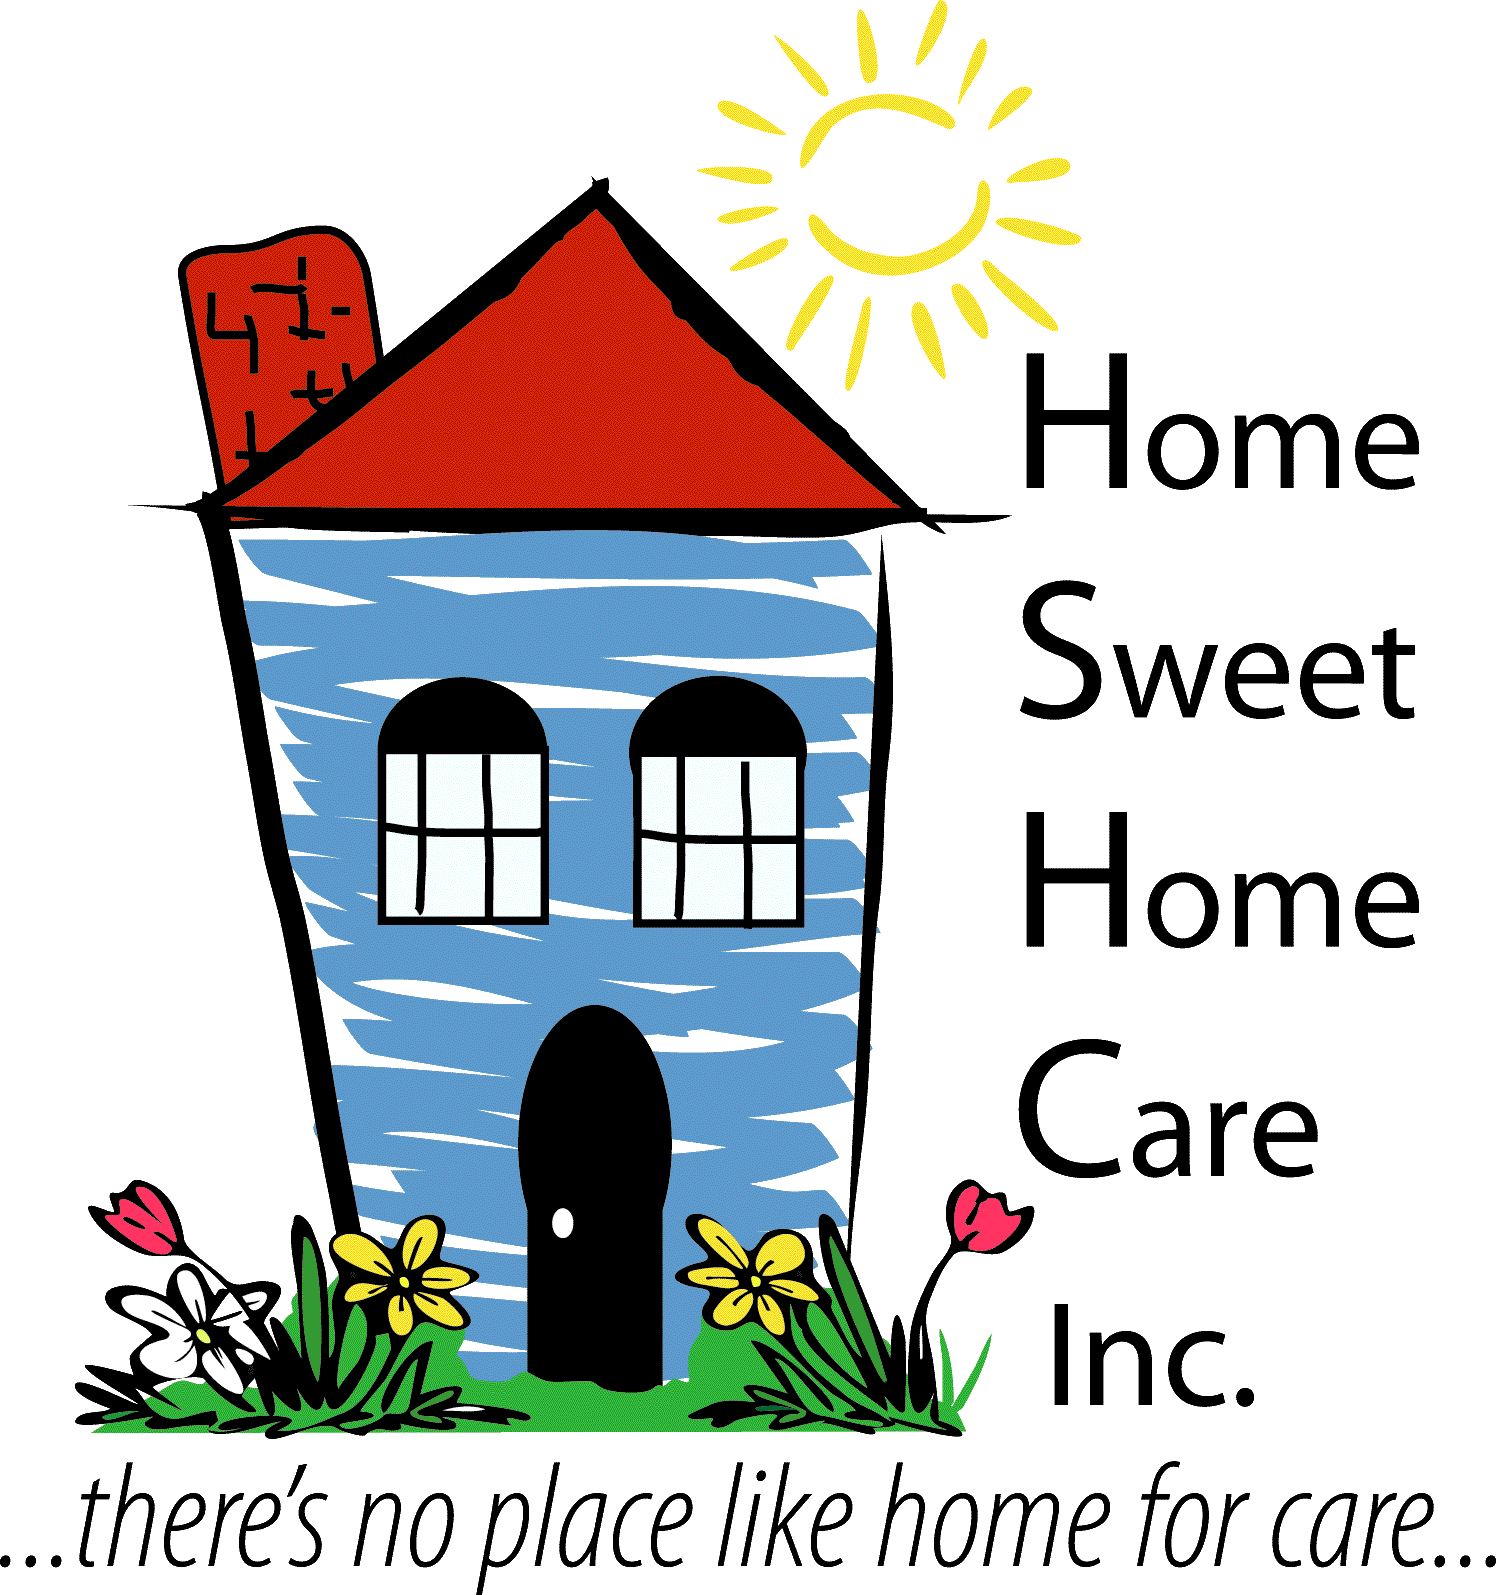 Home Sweet Home Care Inc    Clipart Panda   Free Clipart Images